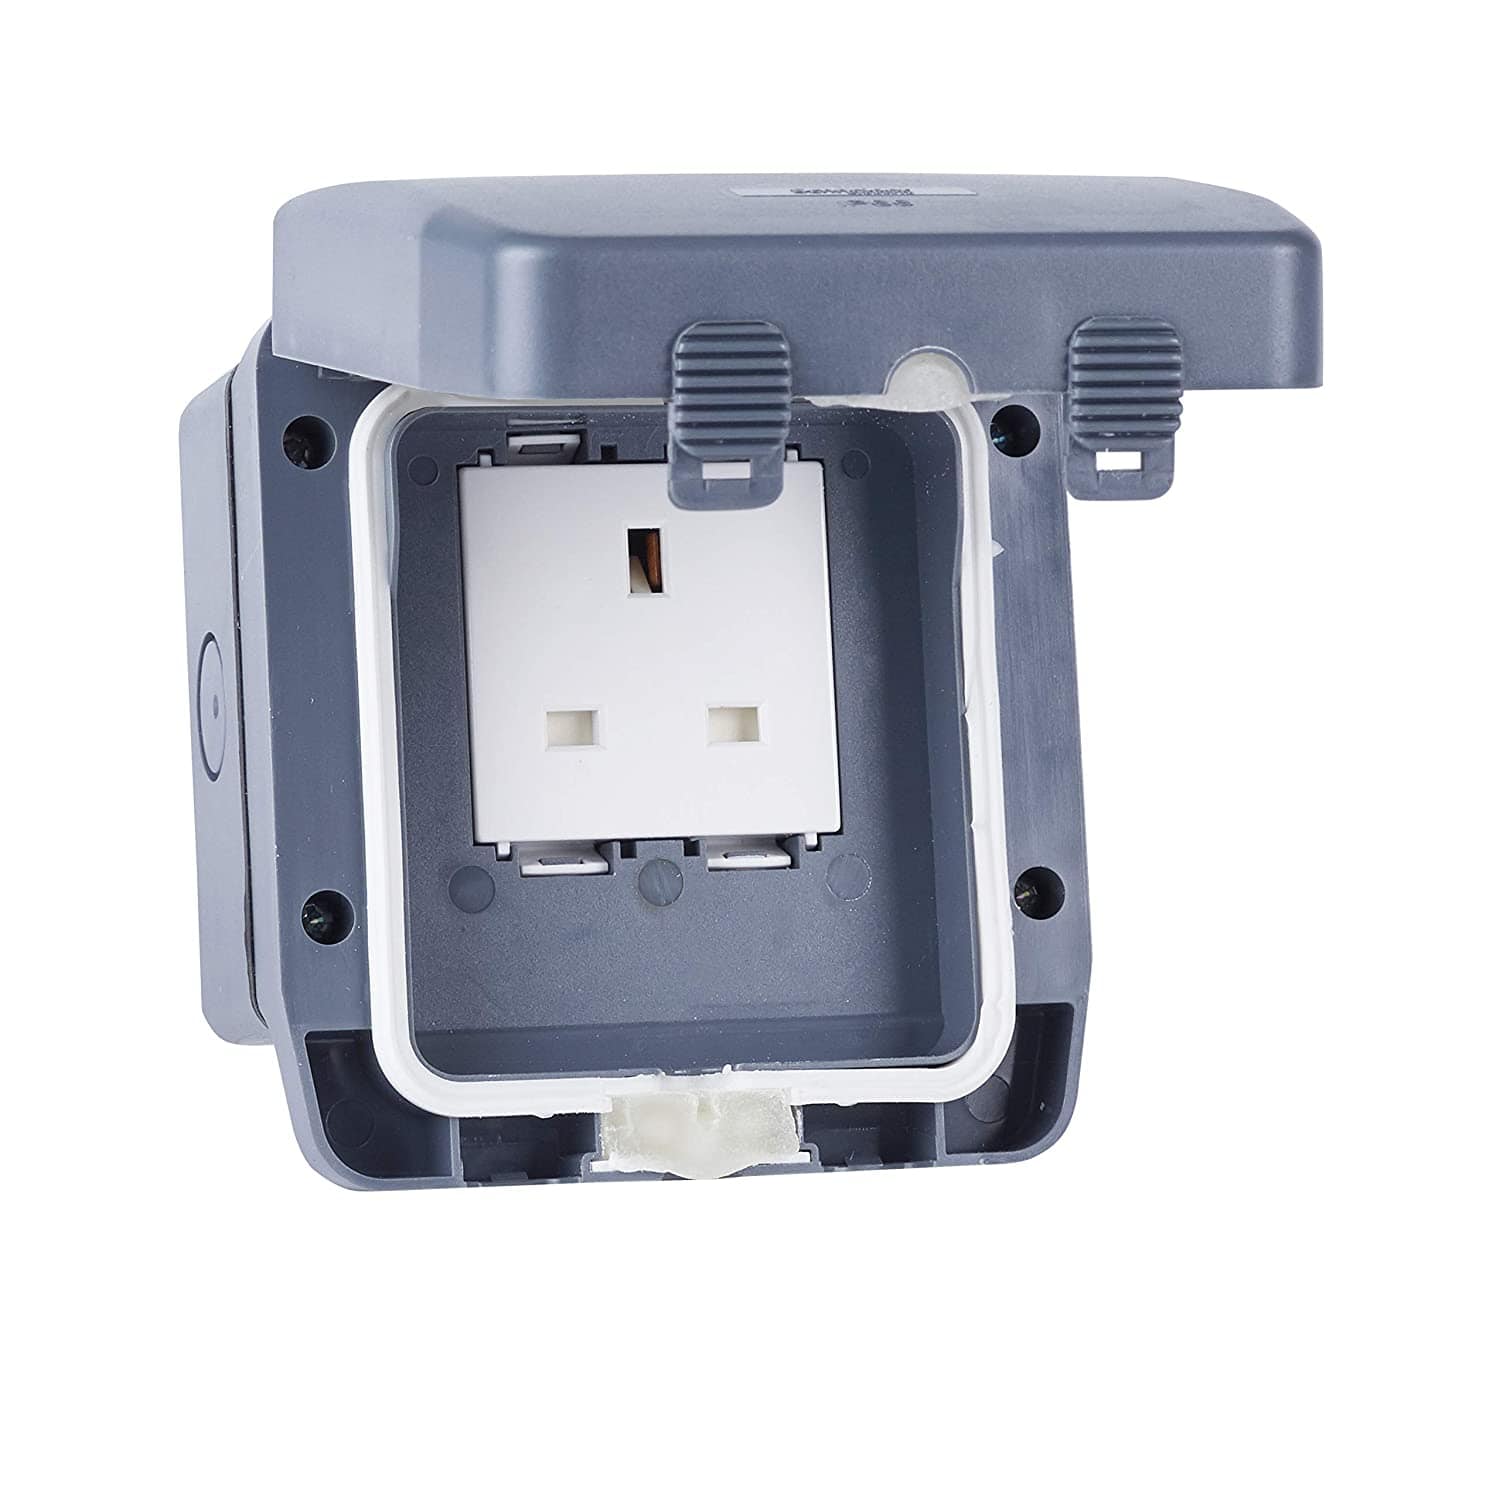 Schneider 13A IP66 1-Gang Switched Outdoor Weatherproof Single Socket | Supply Master | Accra, Ghana Switches & Sockets Buy Tools hardware Building materials